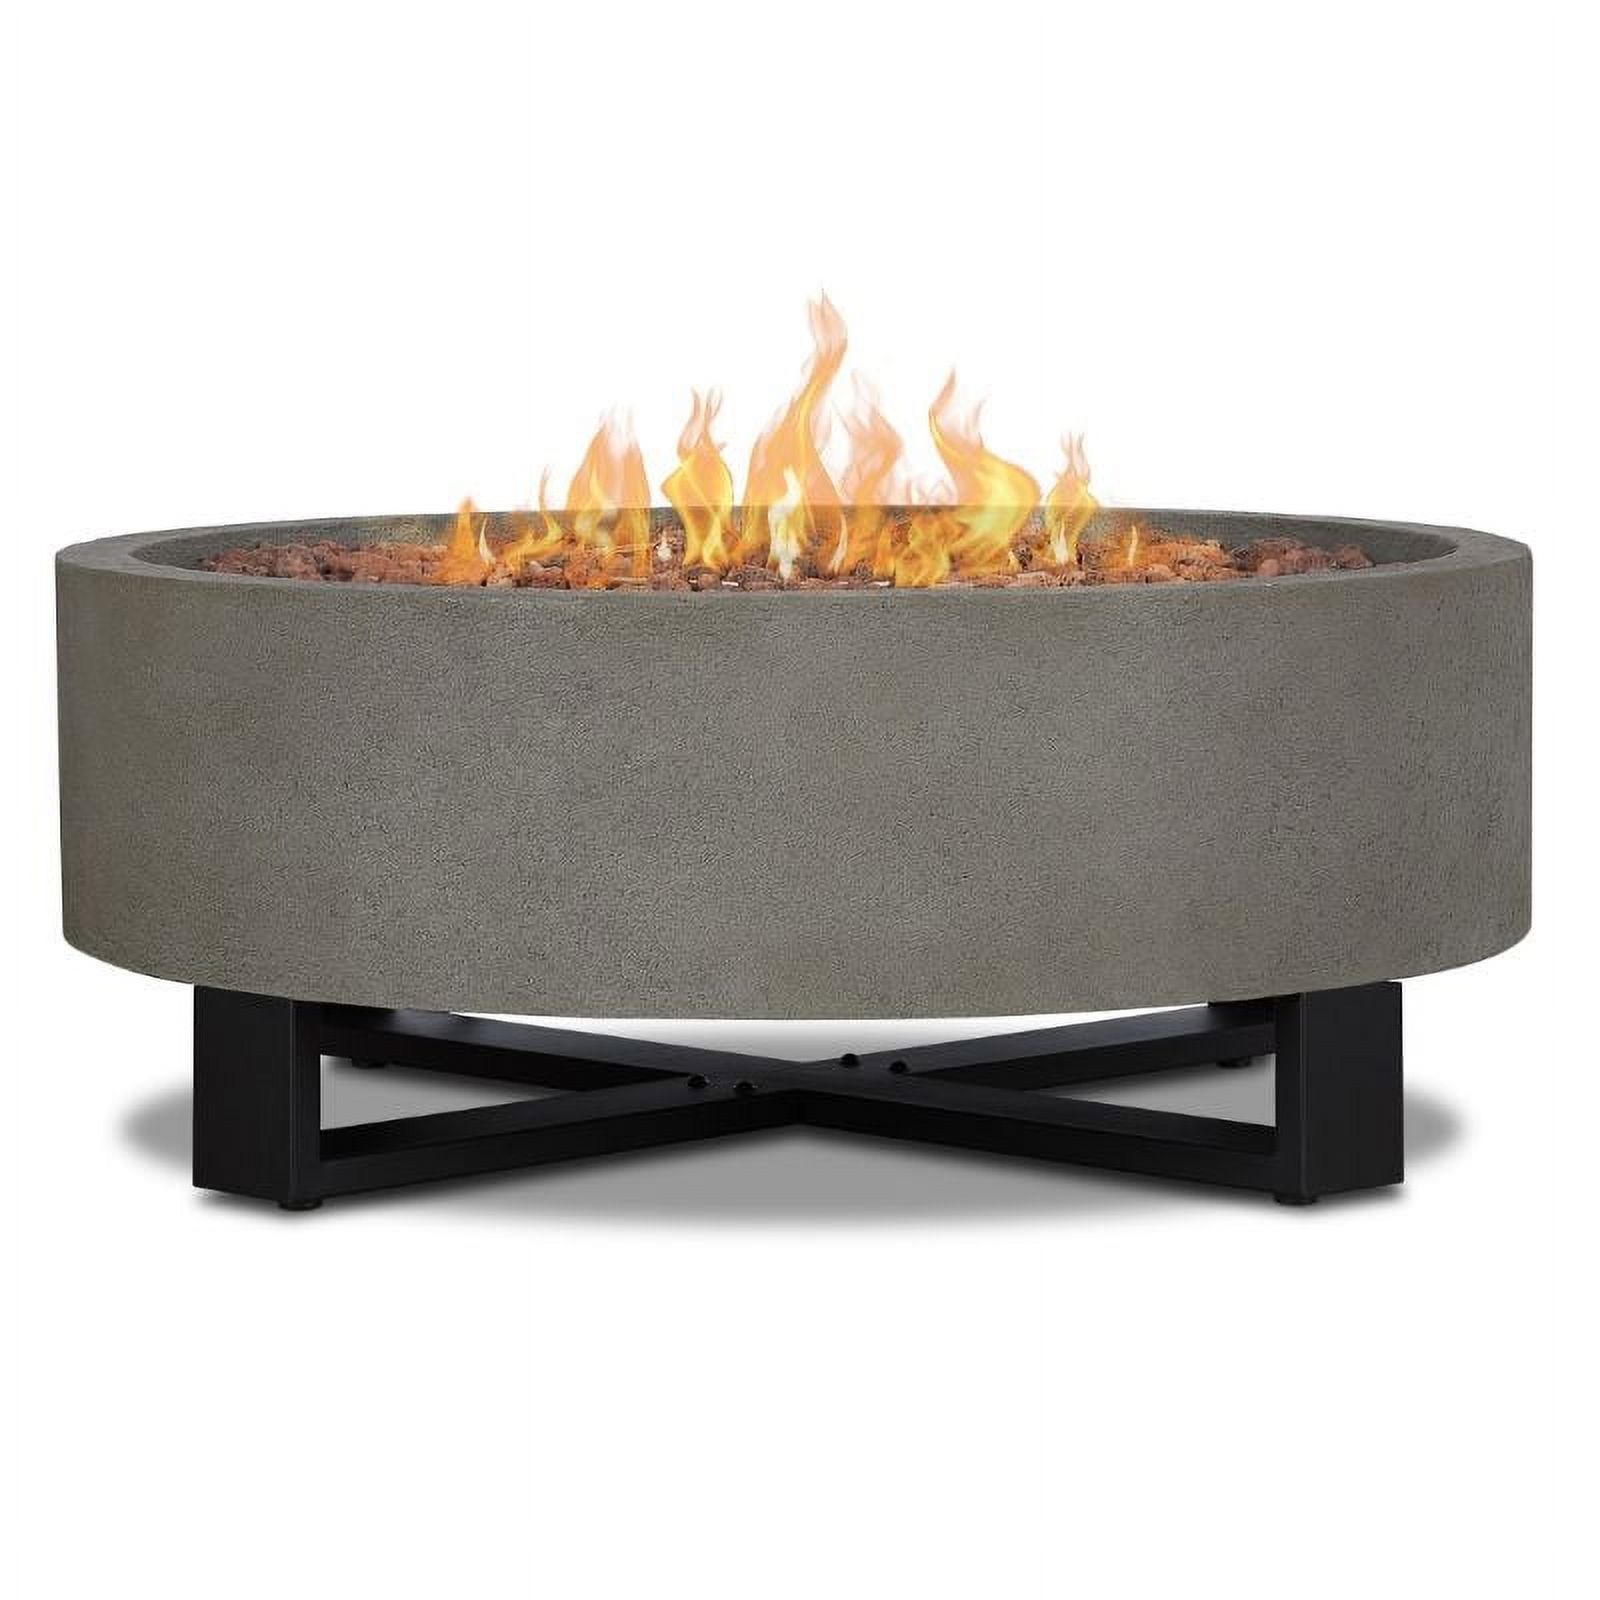 Home Square 4 Piece Set with Fire Bowl for Outdoors Patio Loveseat 2 End Tables - image 4 of 17